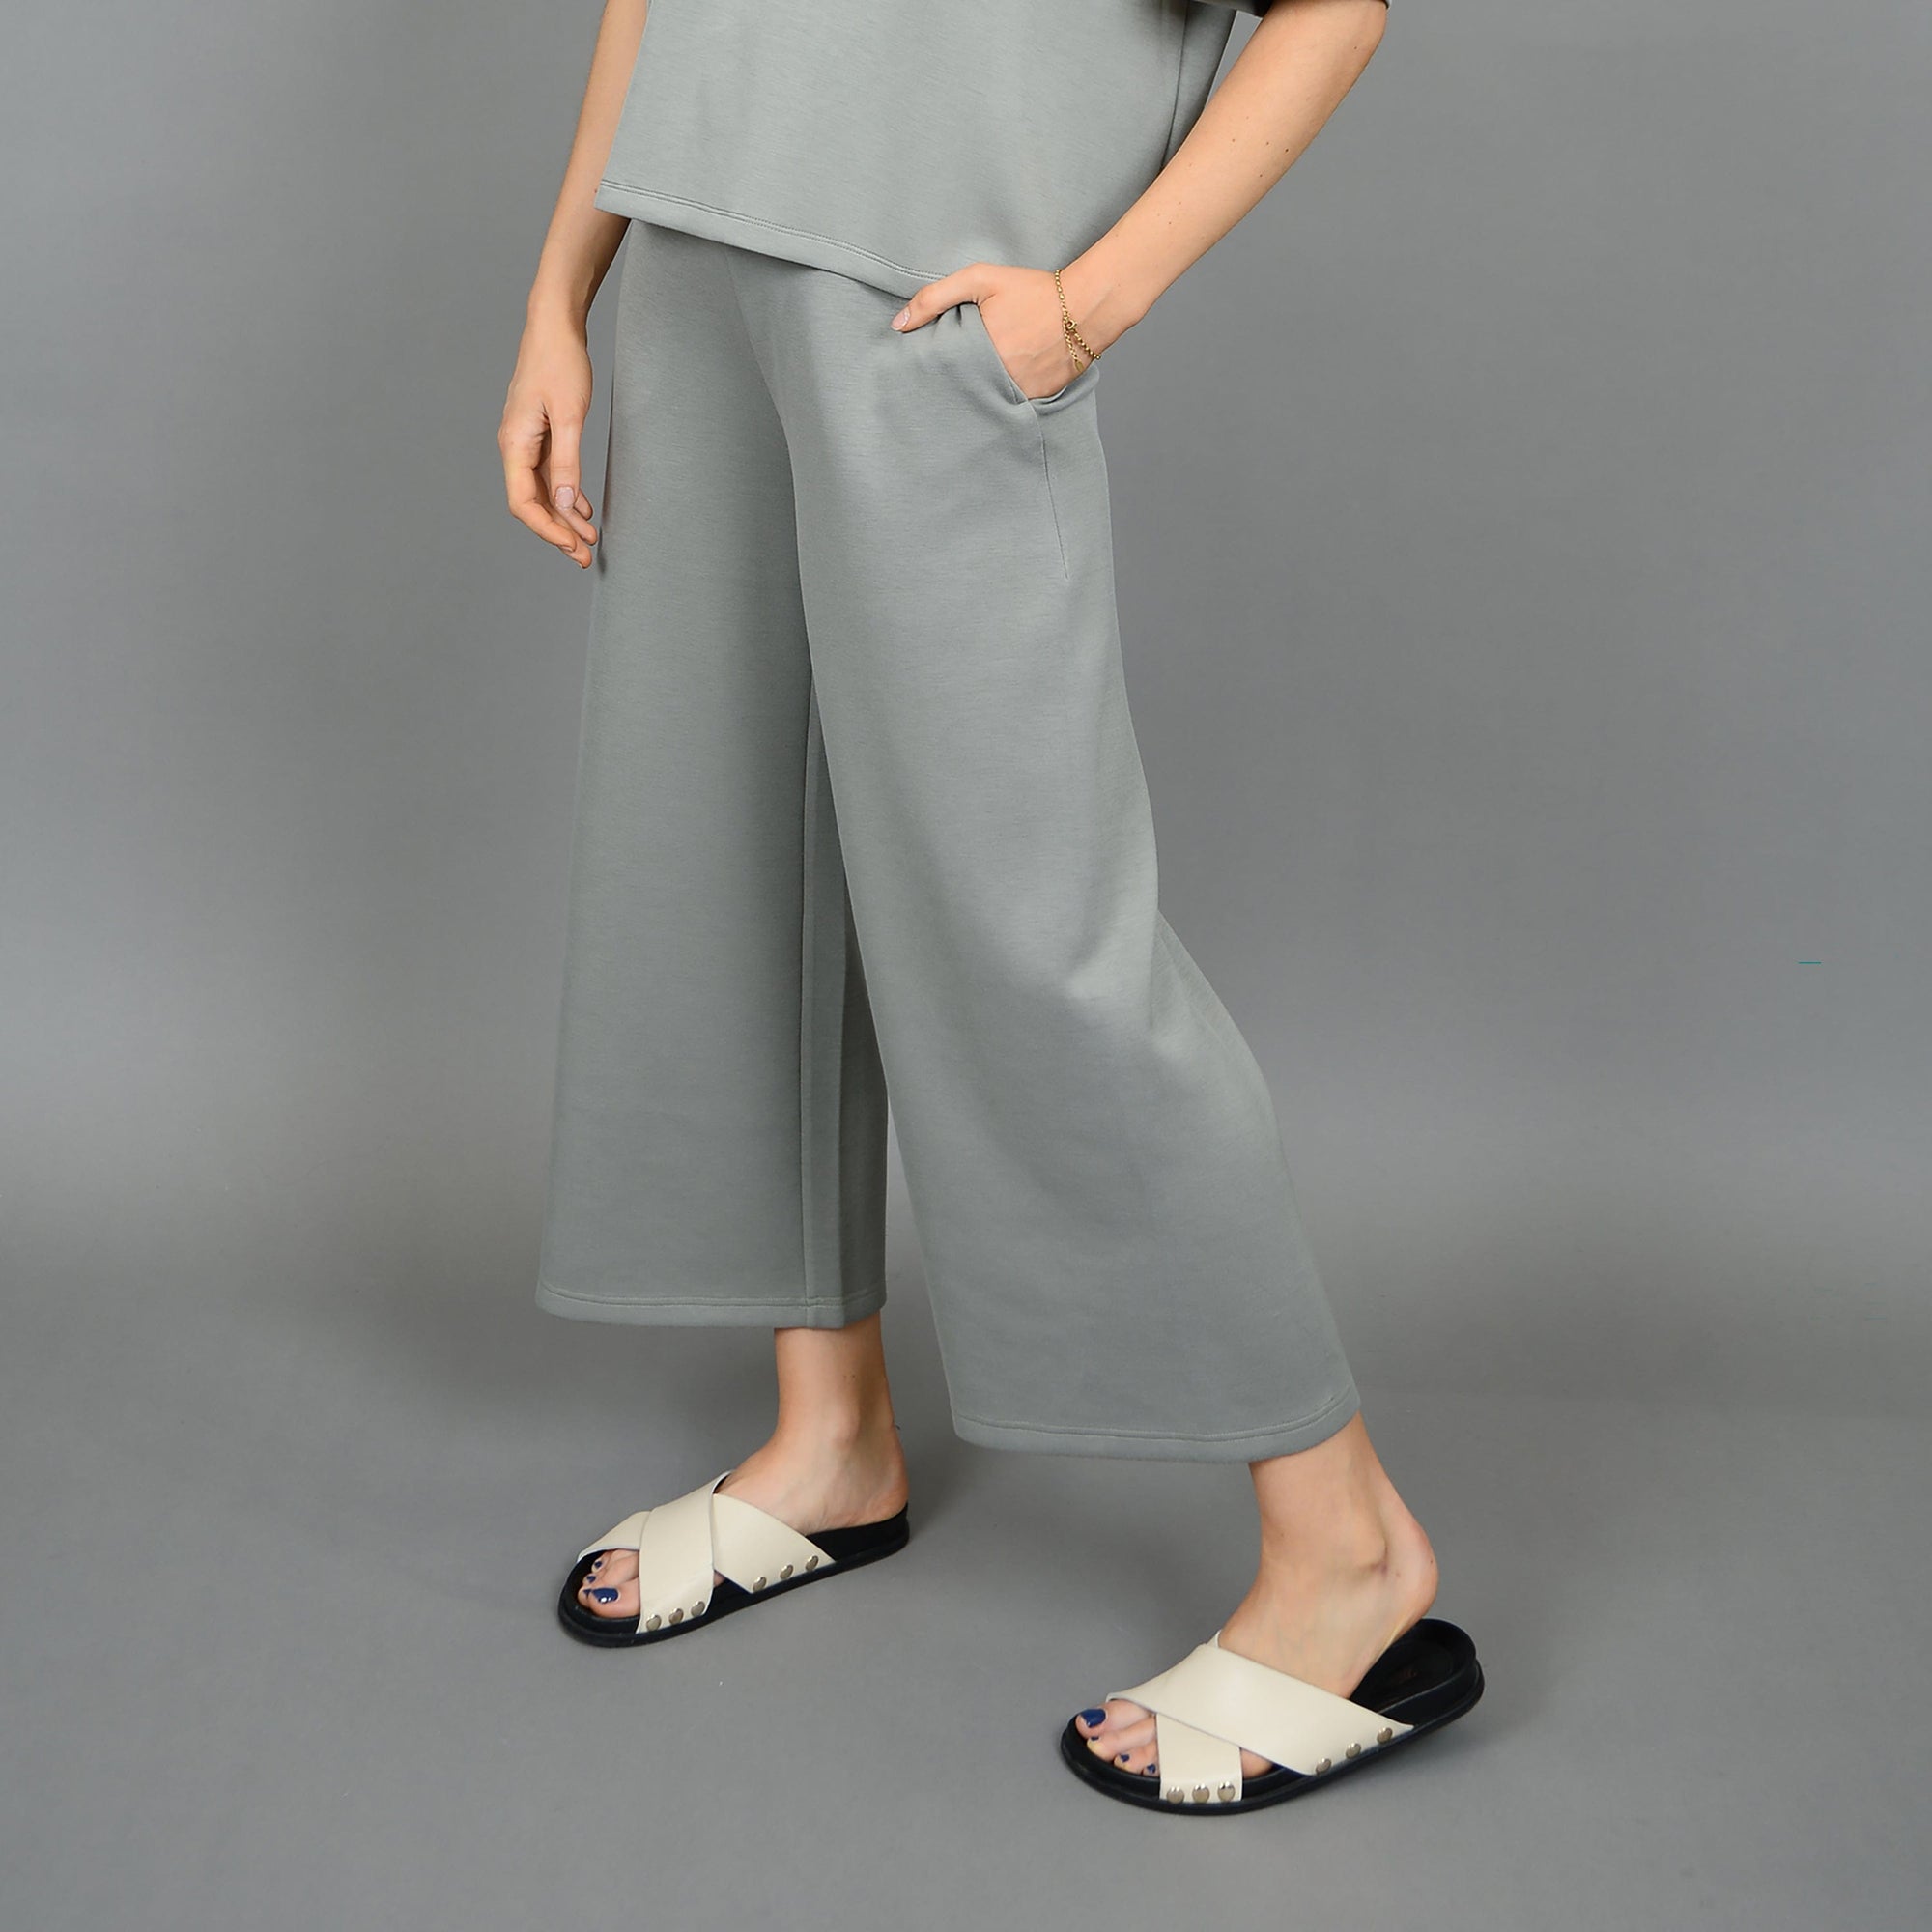 RD Second Skin Victoria Soft Knit Cropped Pants